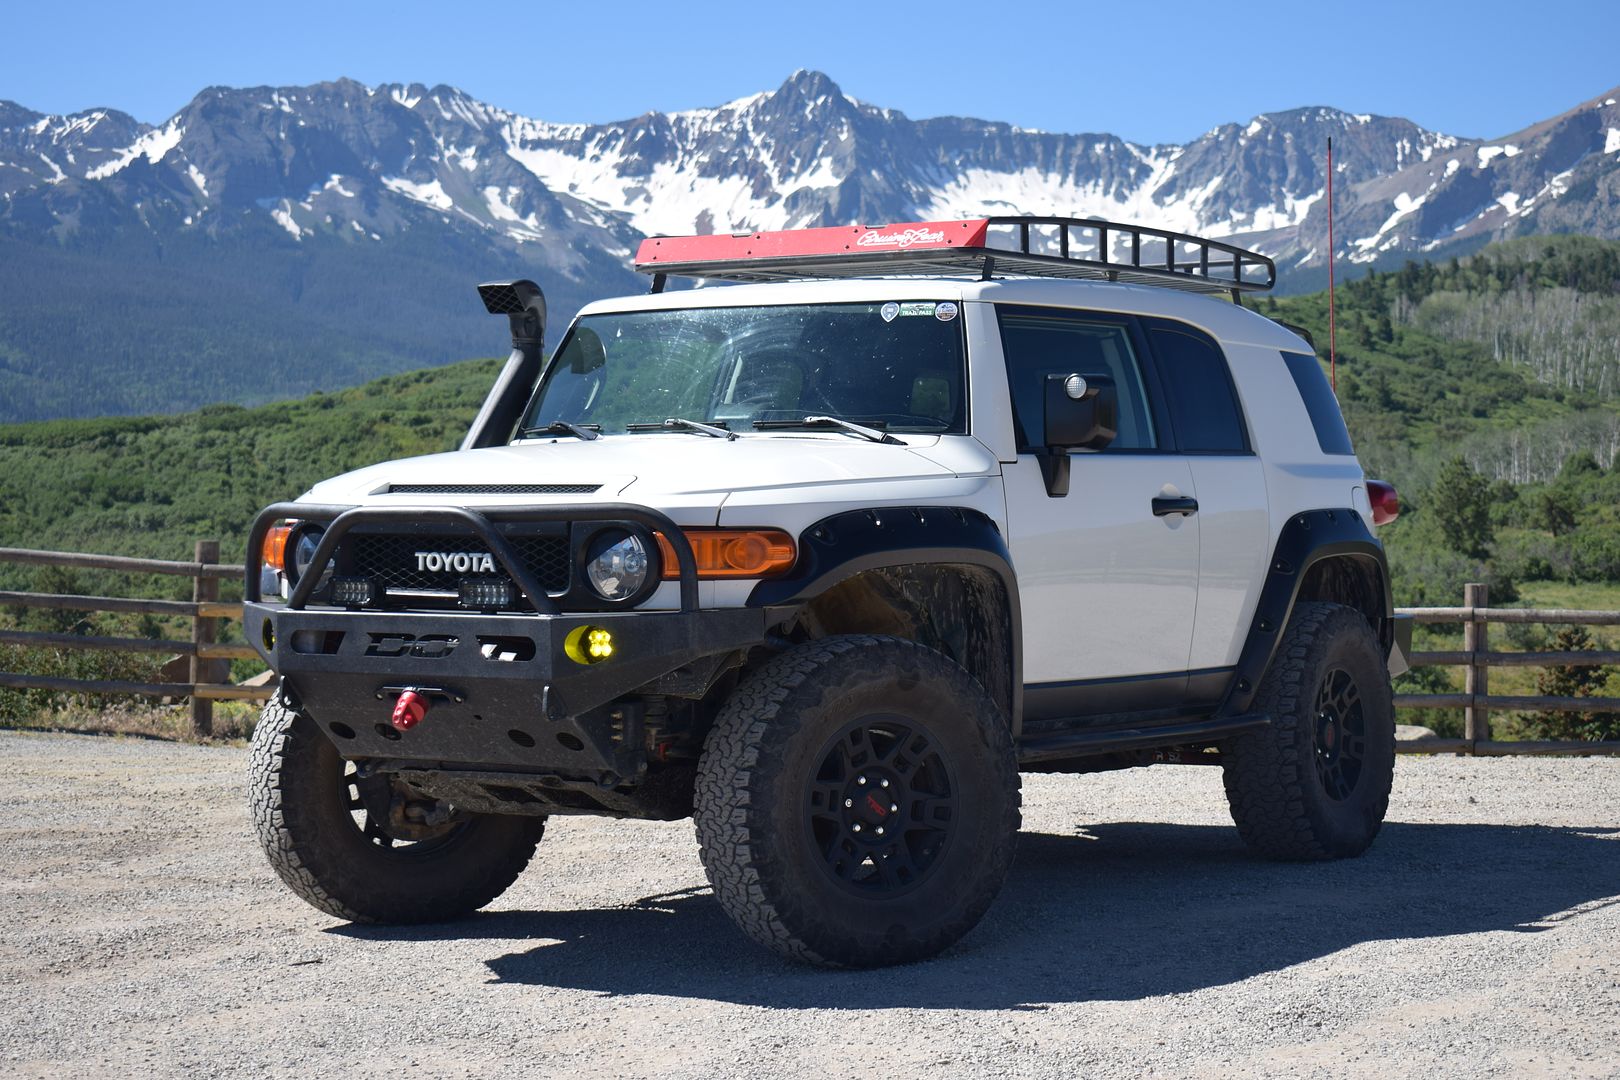 What Tire Size Are You Running? | Toyota FJ Cruiser Forum